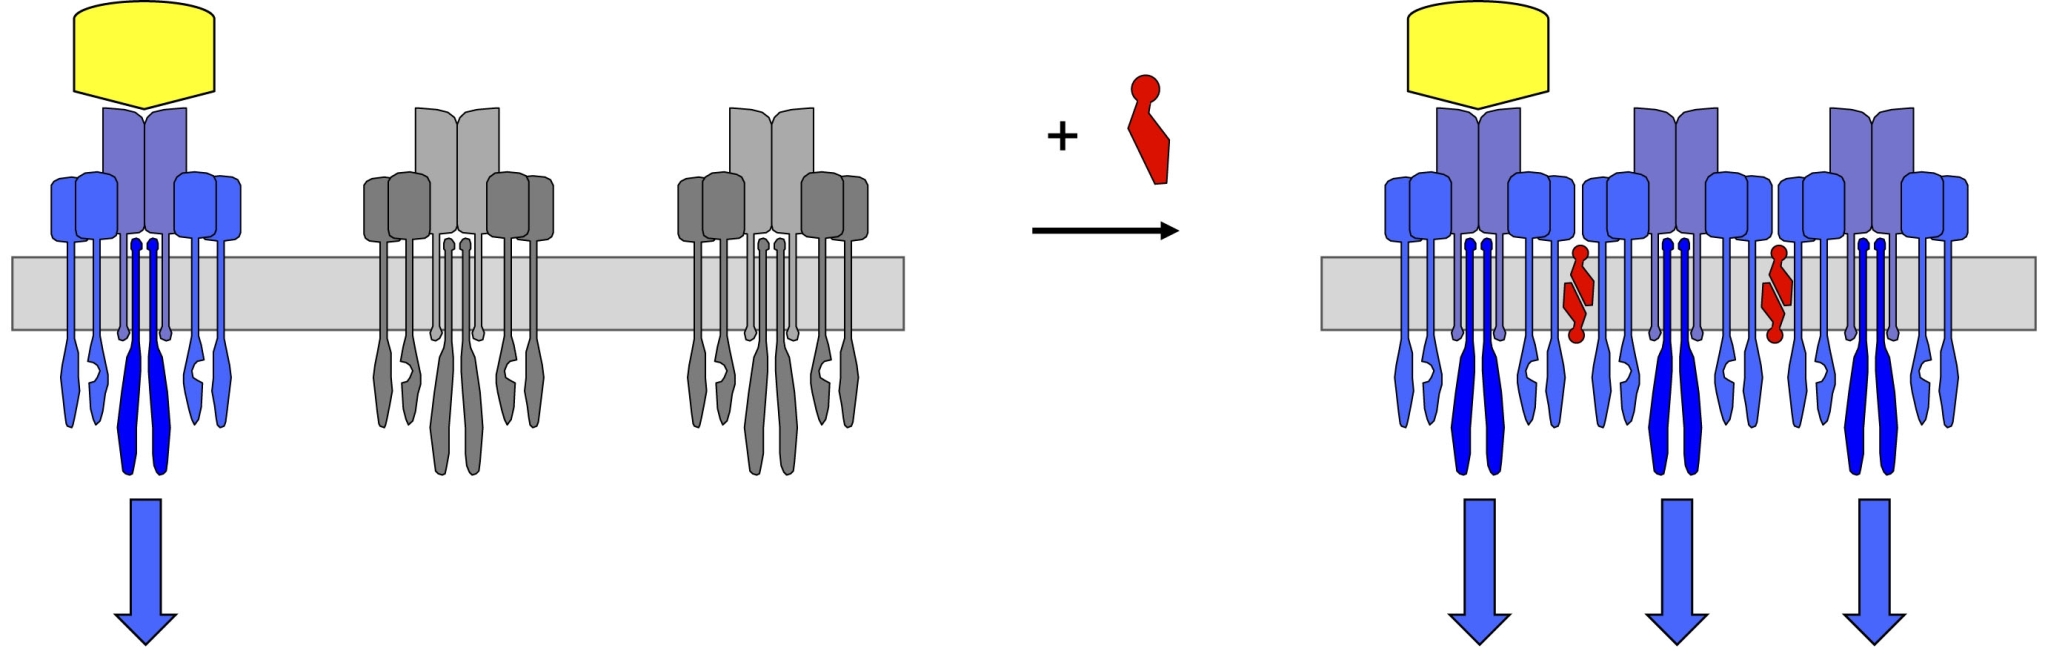 Schematic showing three individual membrane receptors that need to be stimulated with the same number of pathogens; the schematic on the right shows that cholesterol 'glues' the receptors together with the result that one pathogen is able to stimulate all